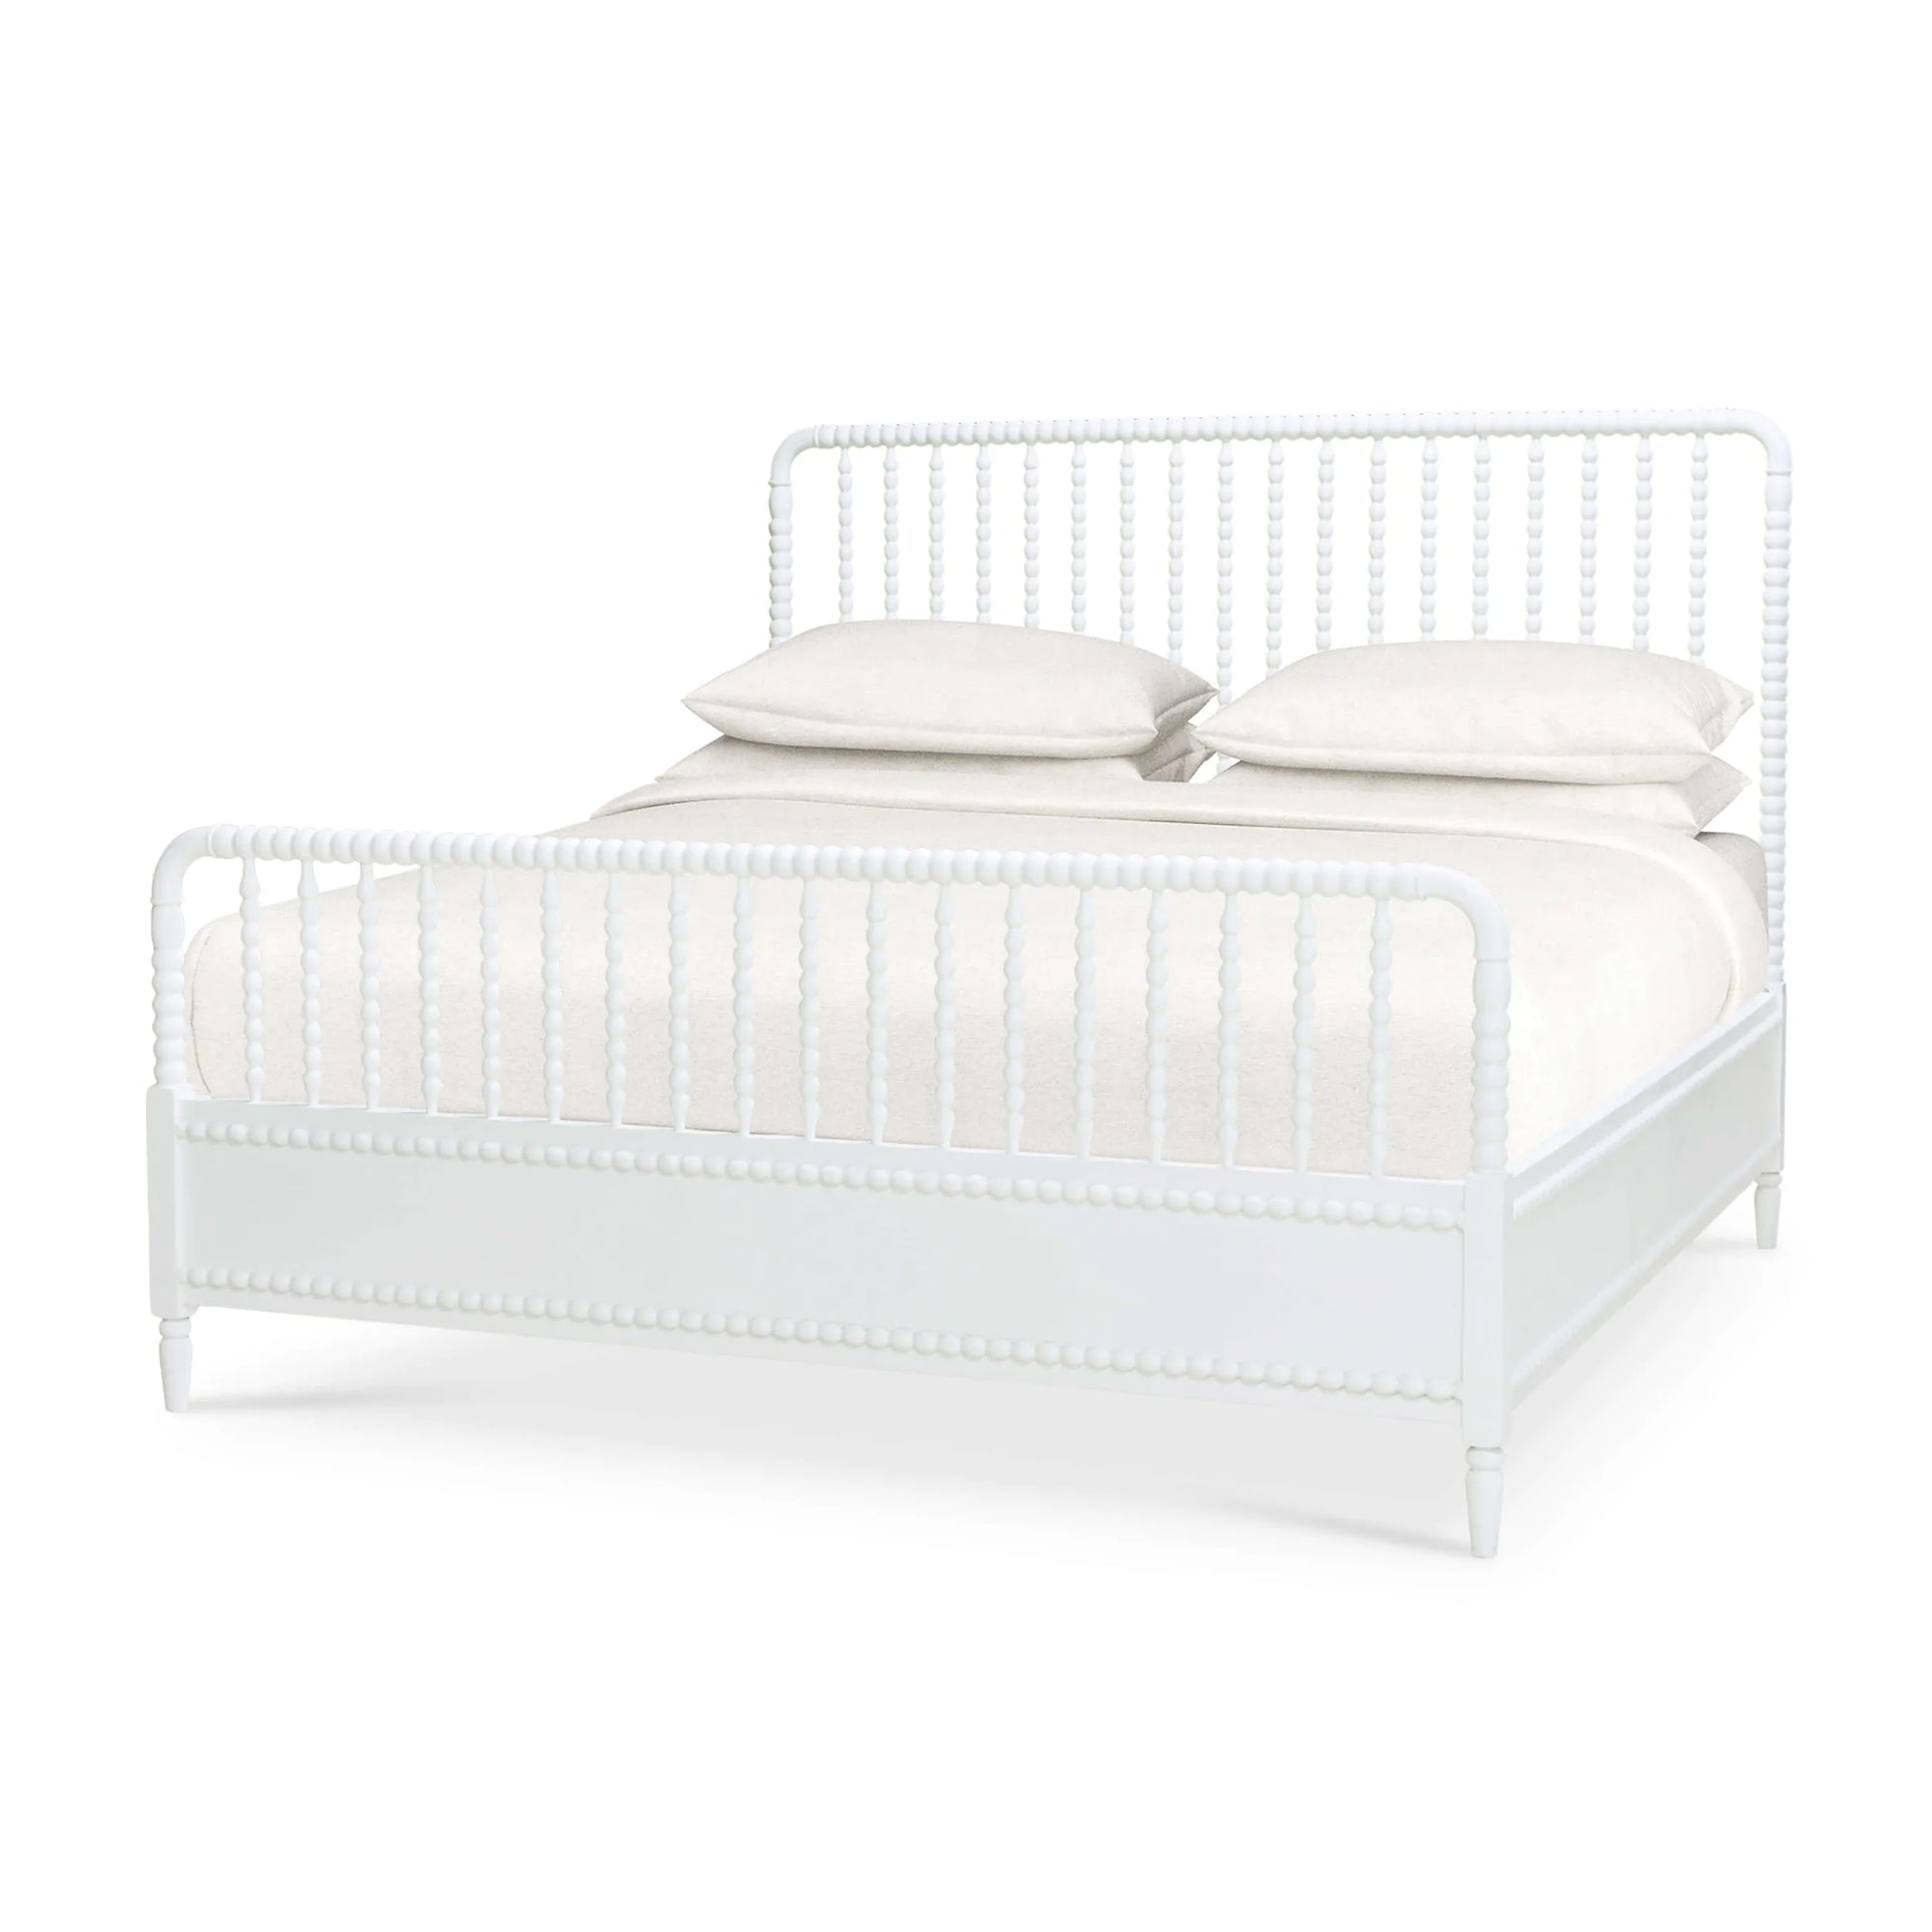 Cholet Bed King Architectural White, Light Distressed